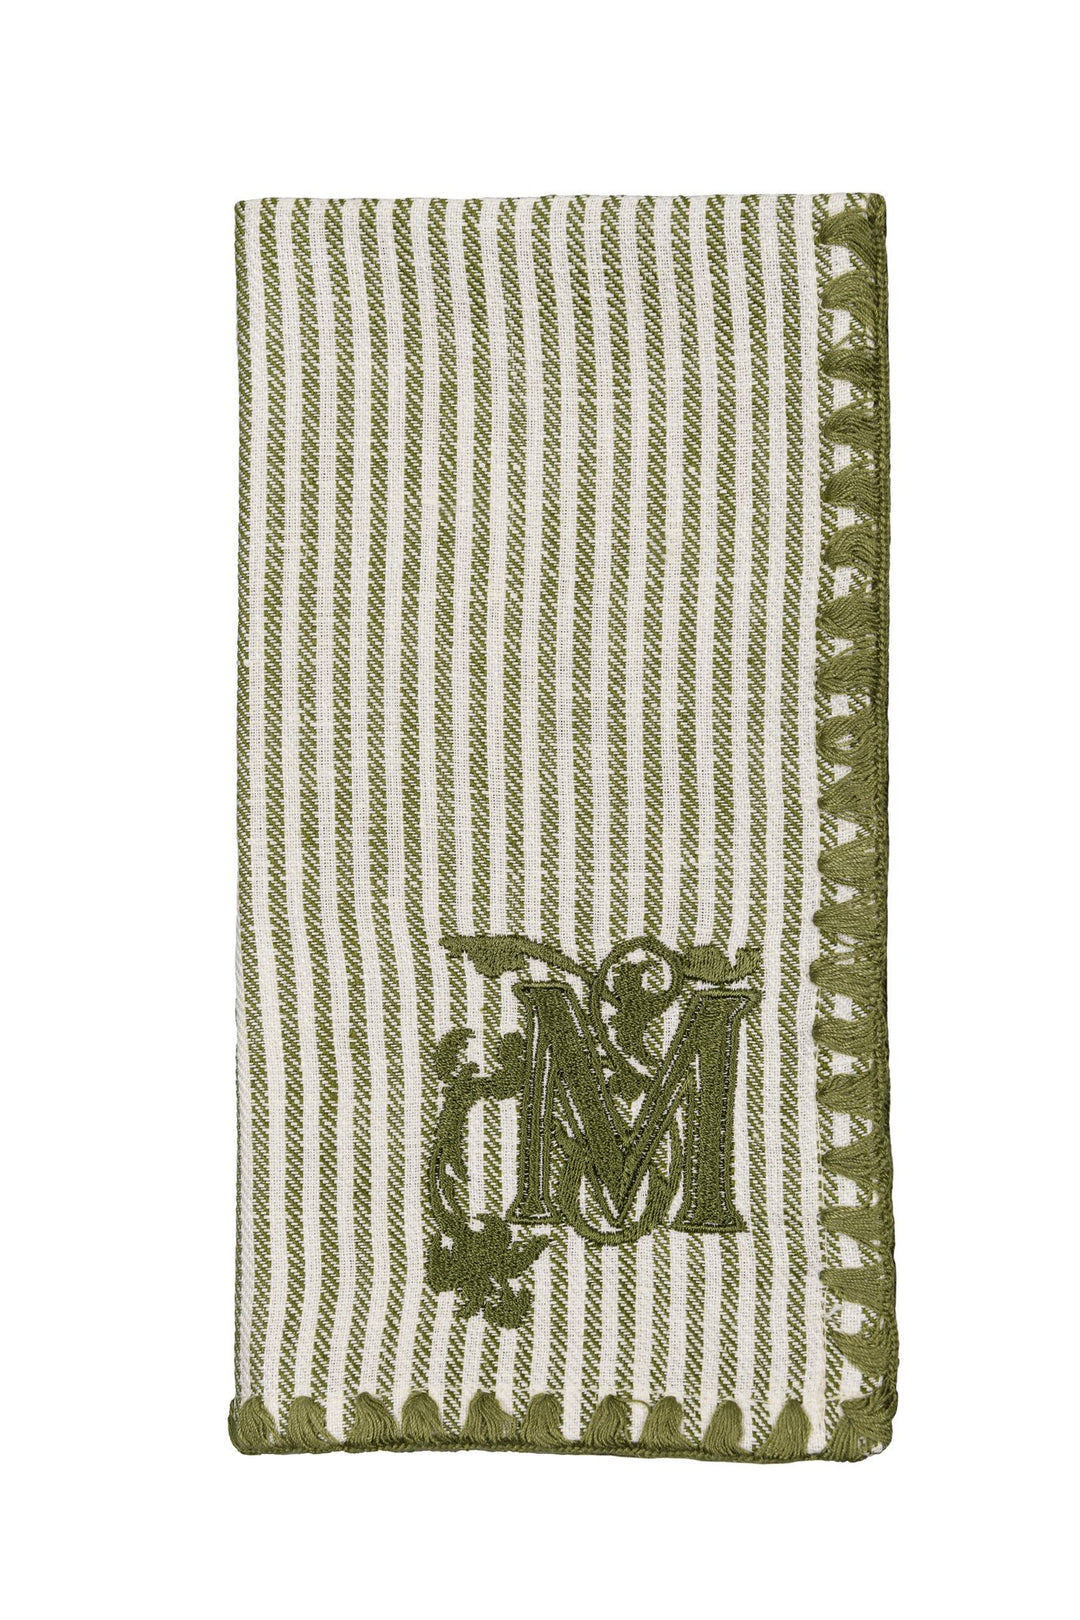 mind-the-gap-green-striped-linen-napkins-luxury-set-of-two-monogramped-embroidered